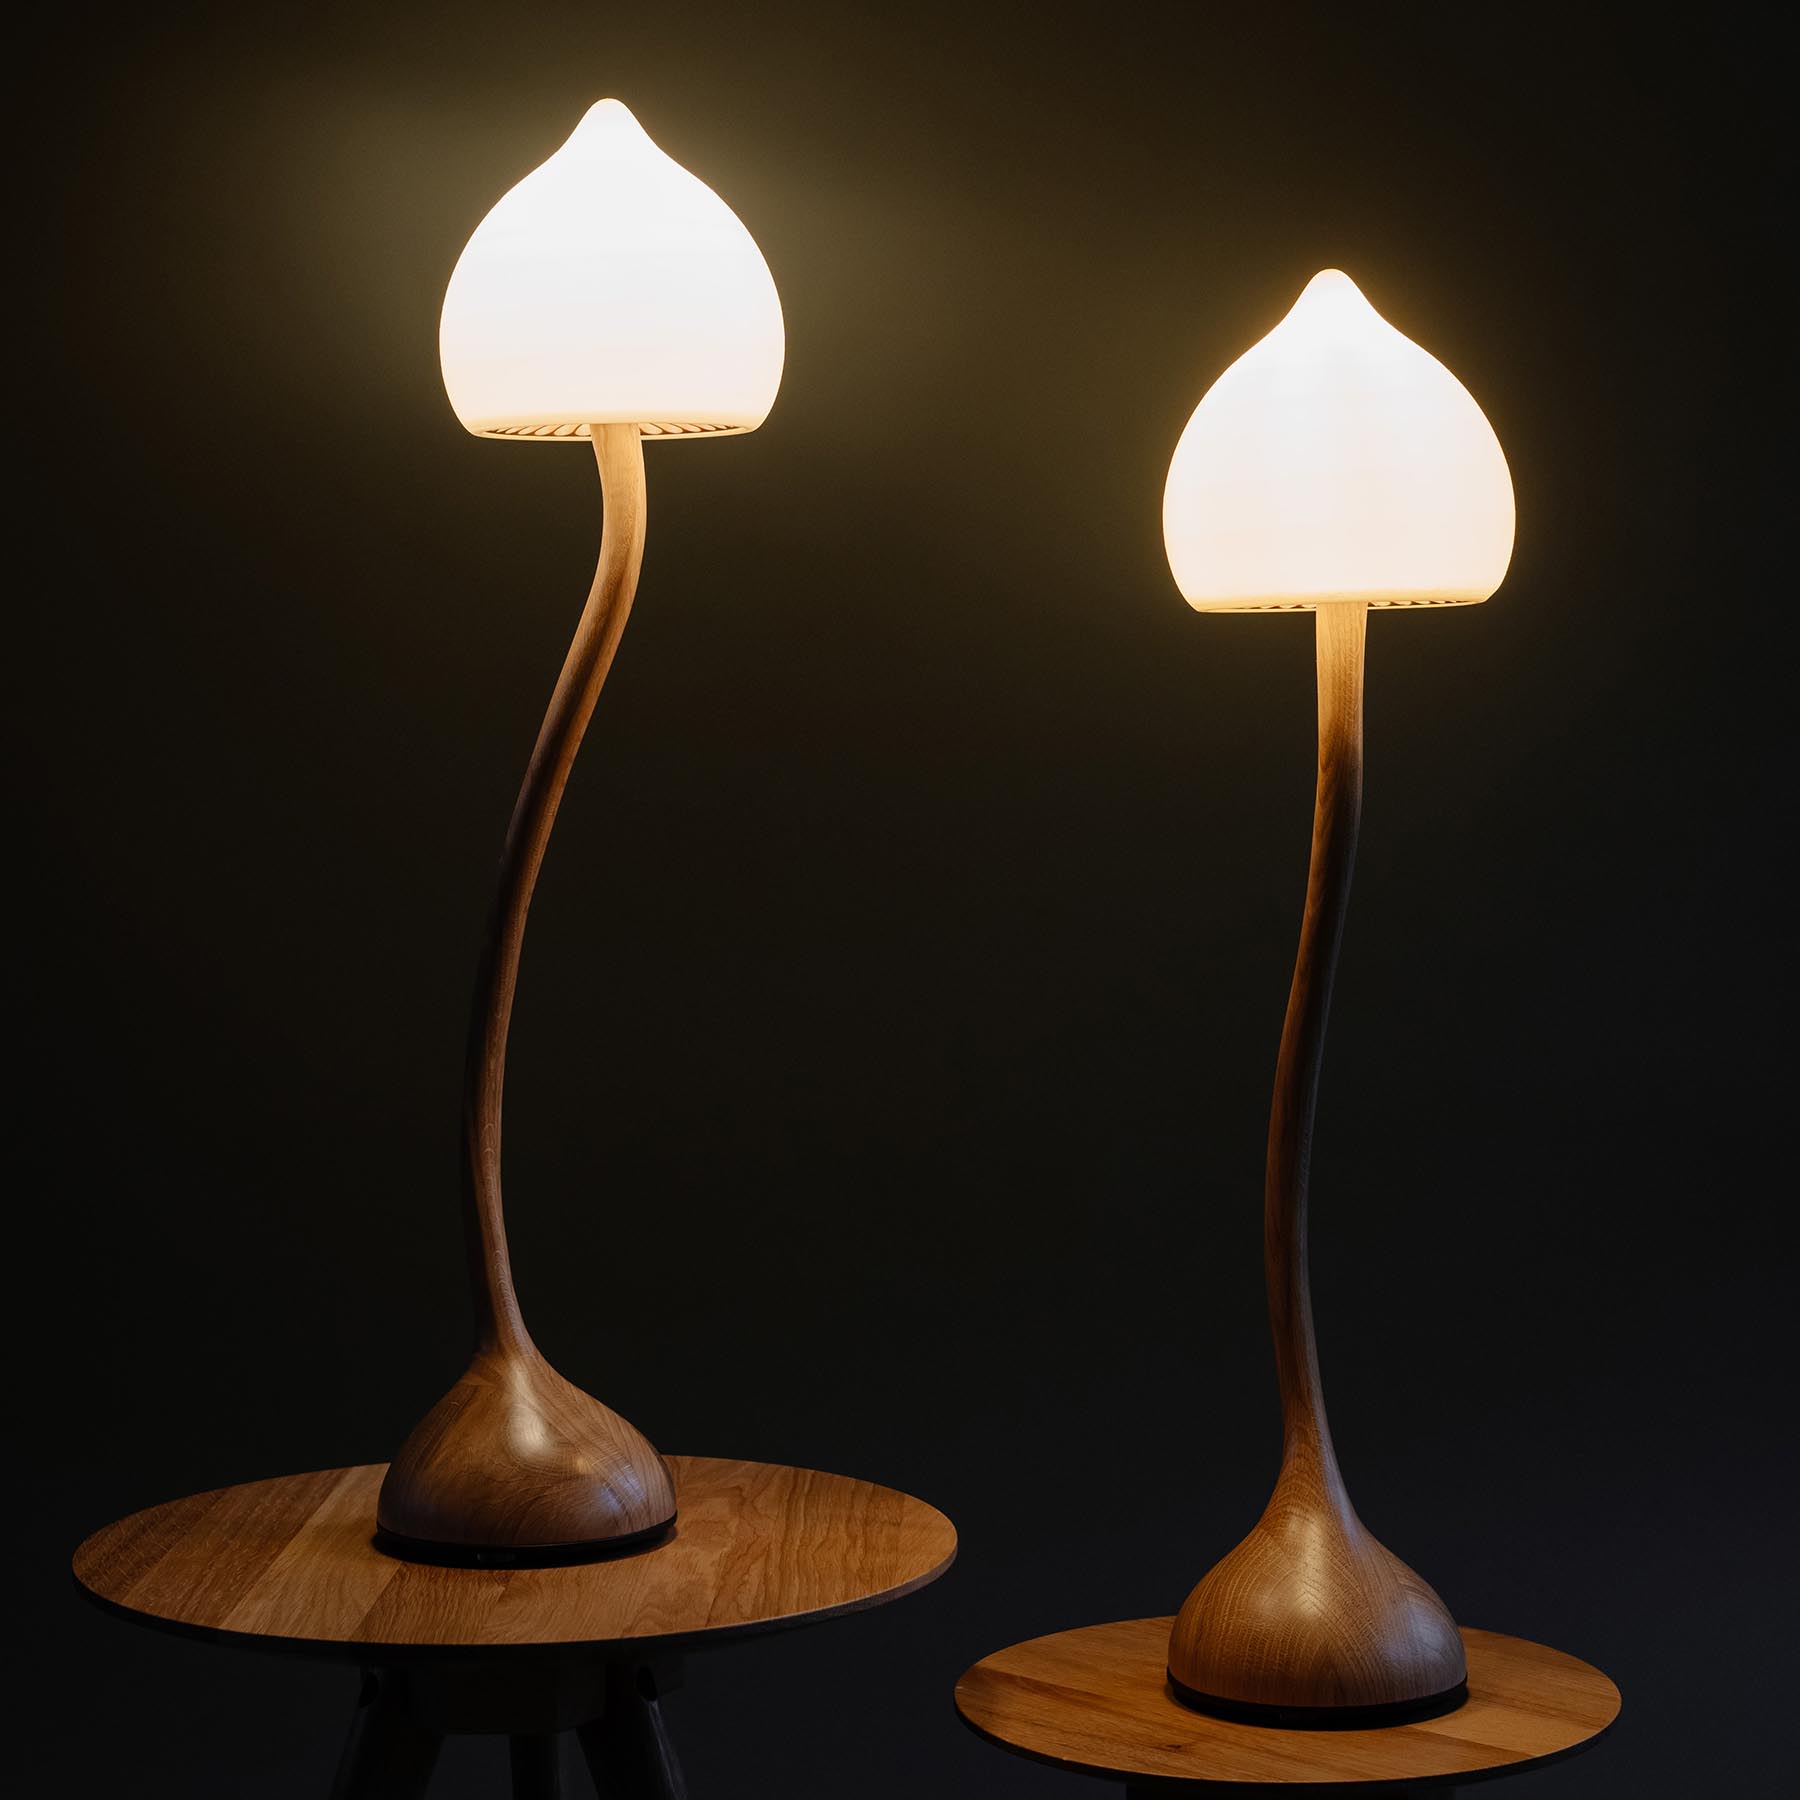 A mushroom-inspired table lamp made from wood.